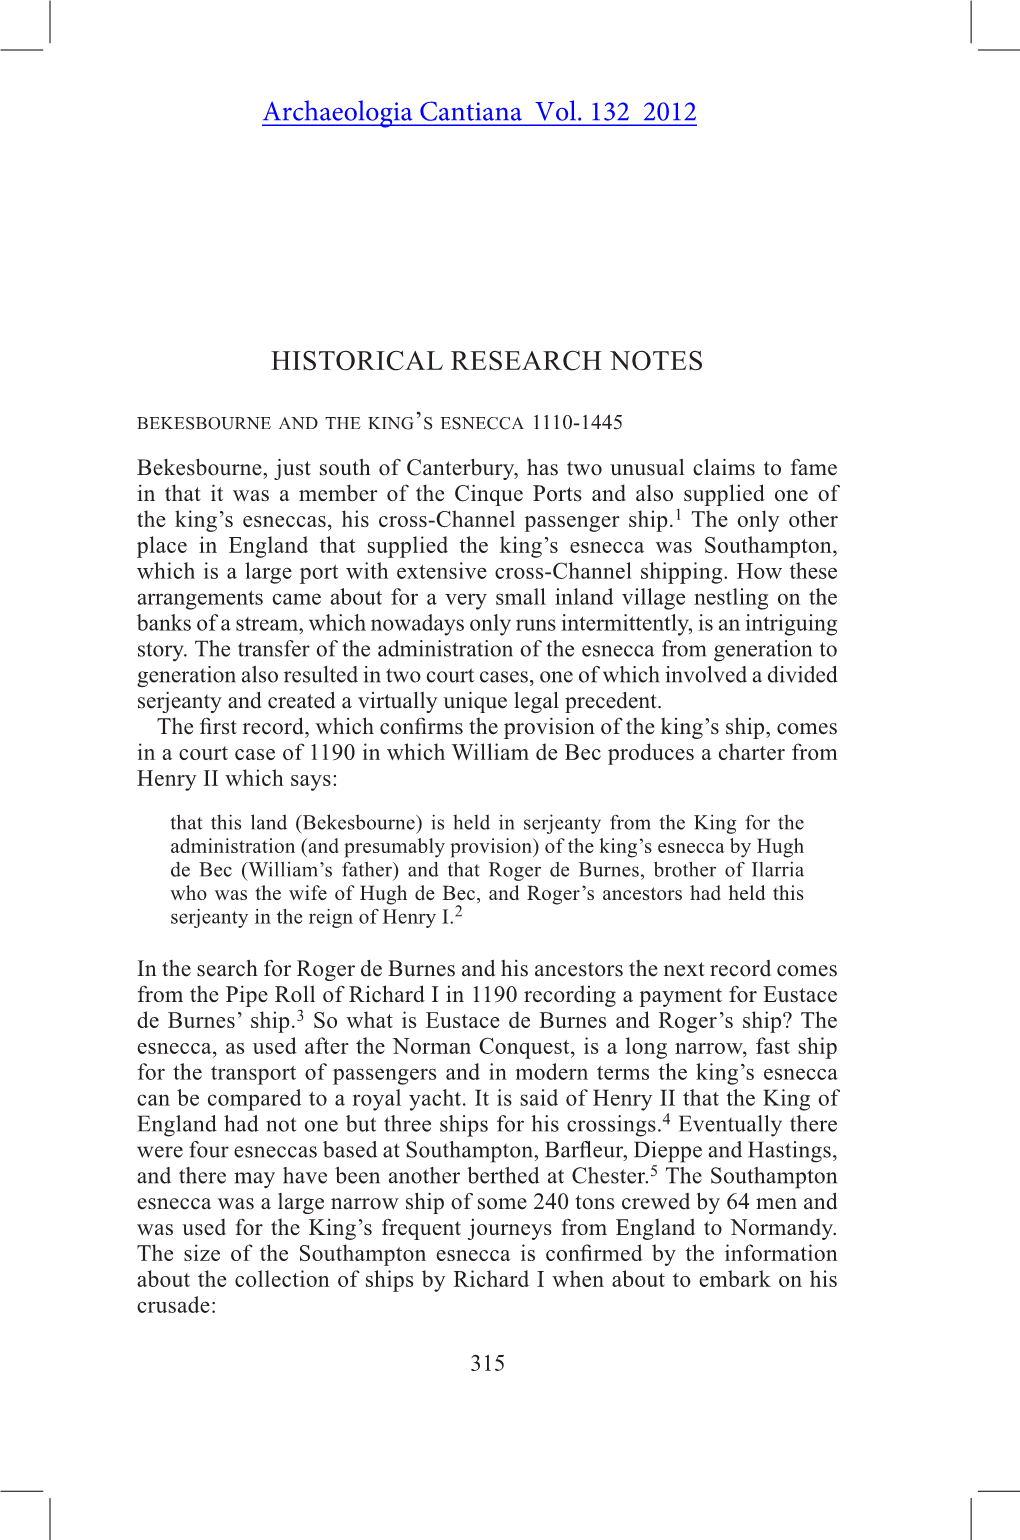 Historical Research Notes